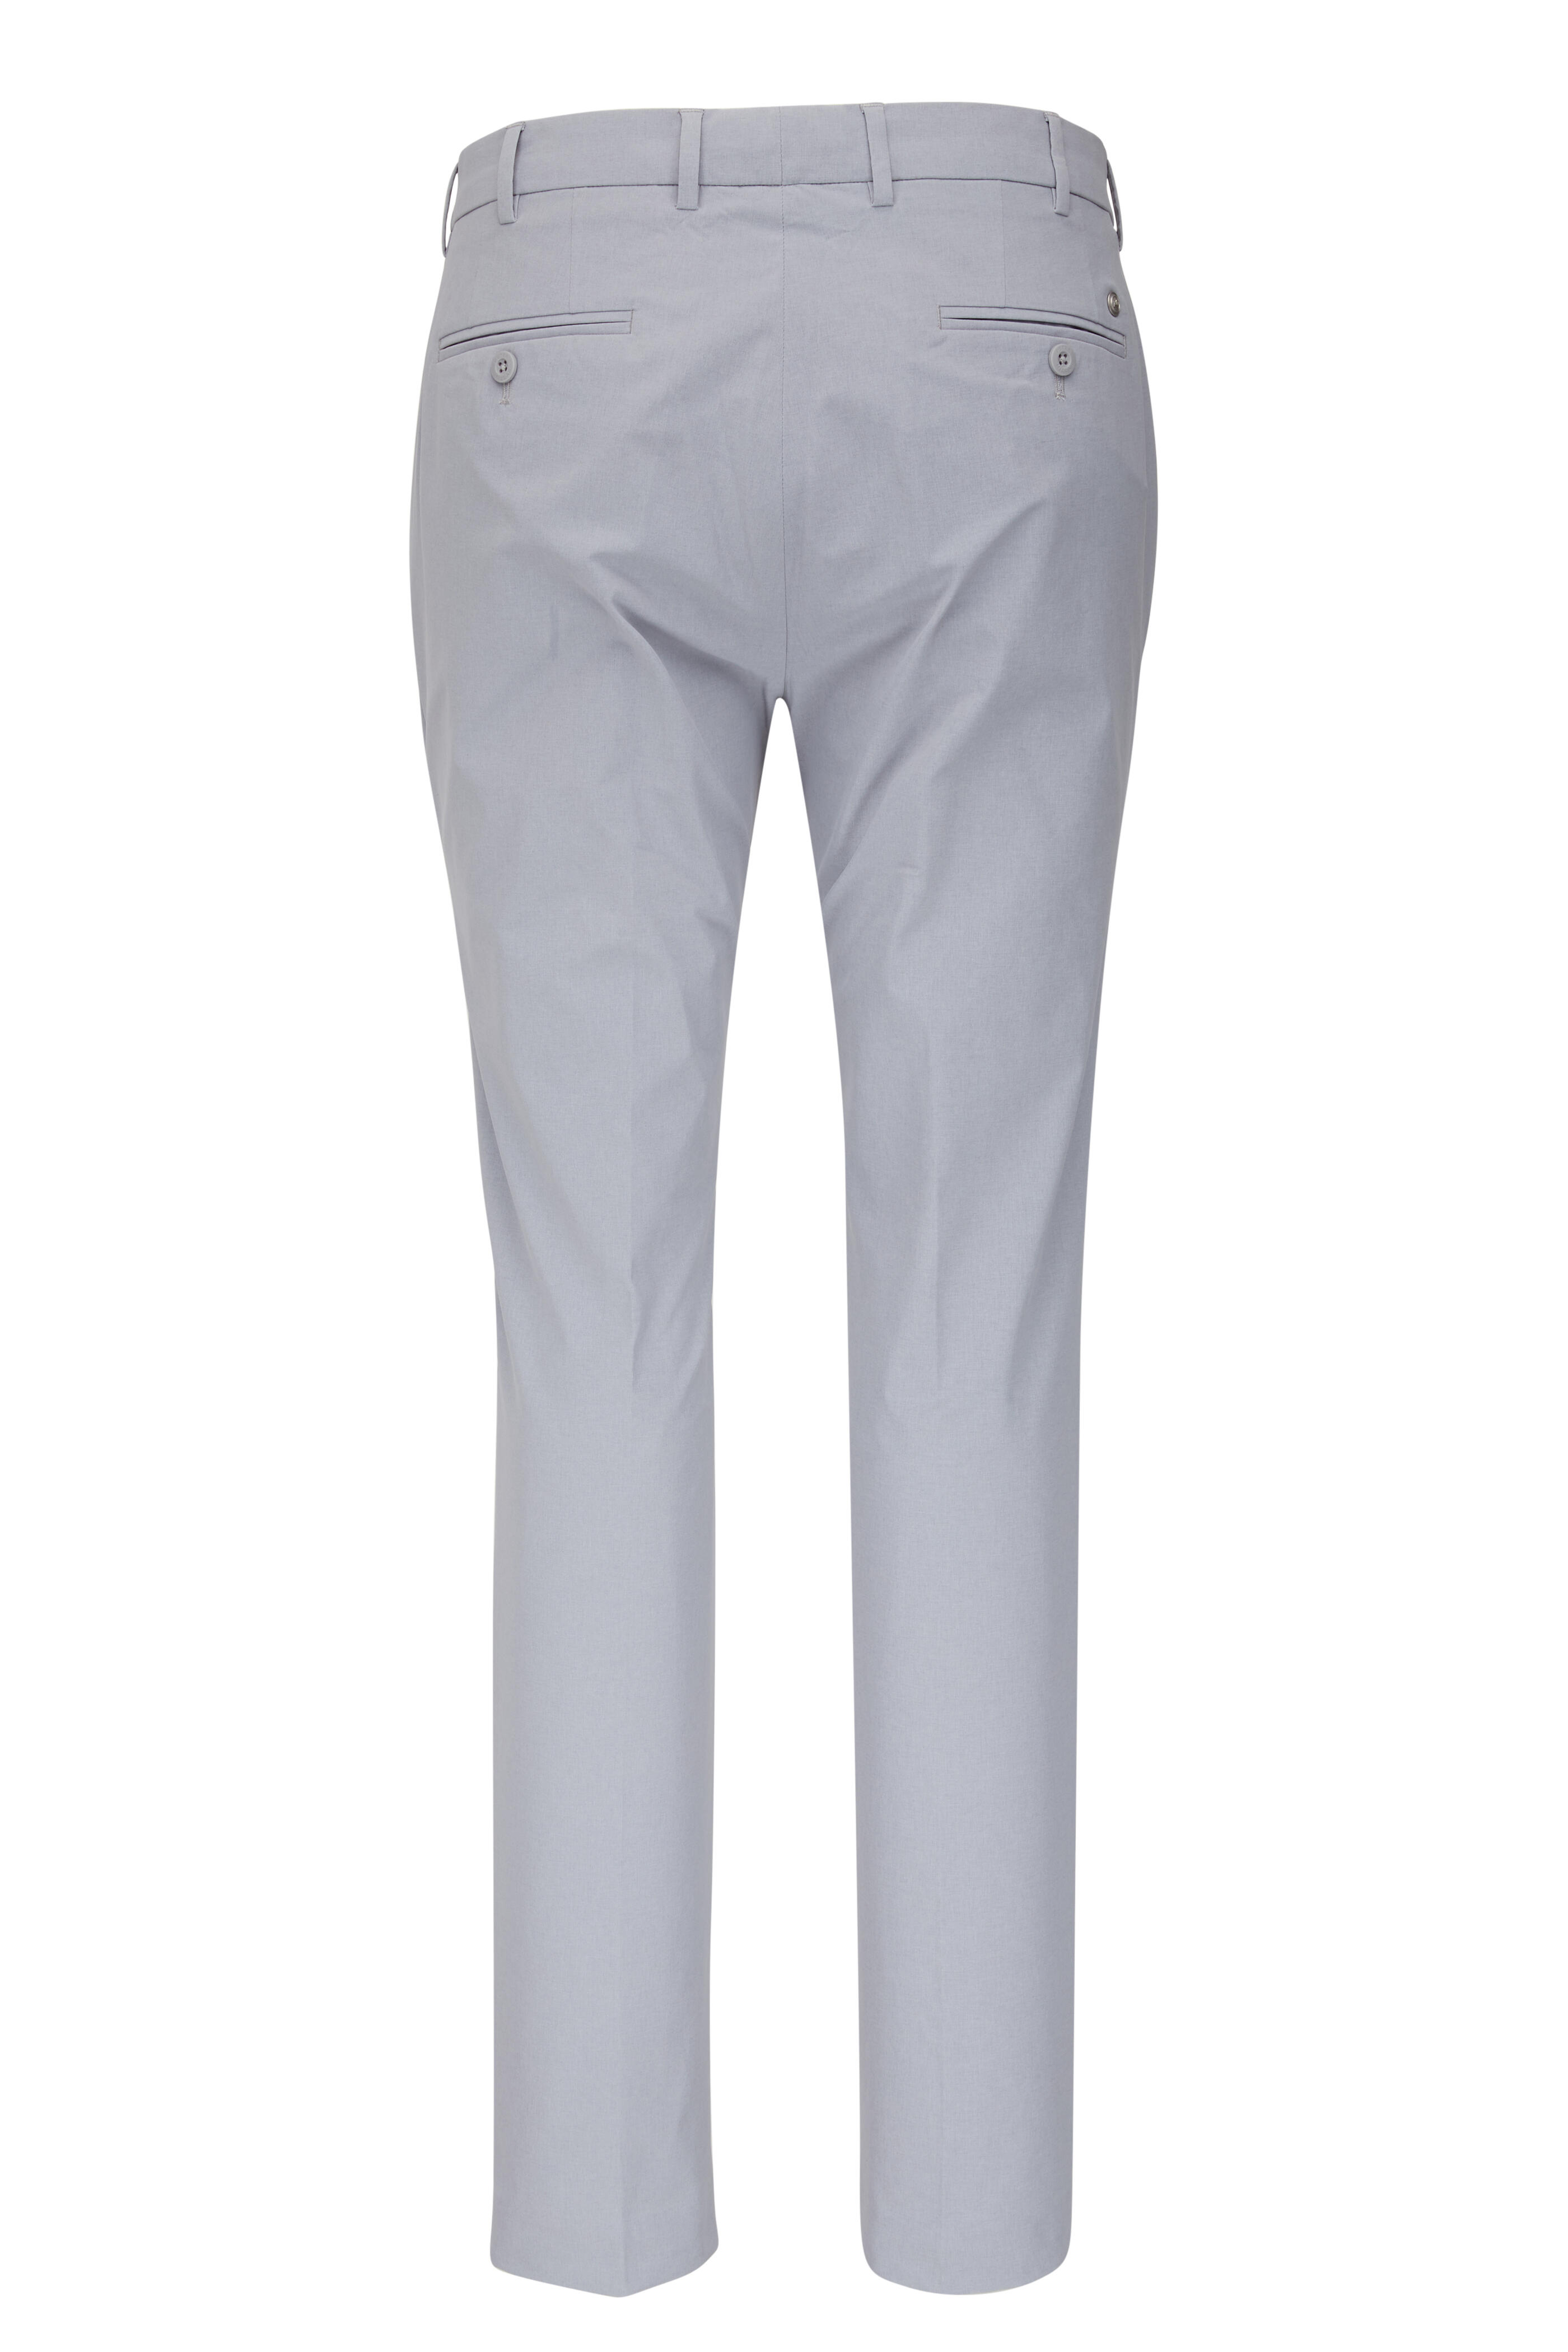 Peter Millar - Surge Gale Gray Performance Pant | Mitchell Stores